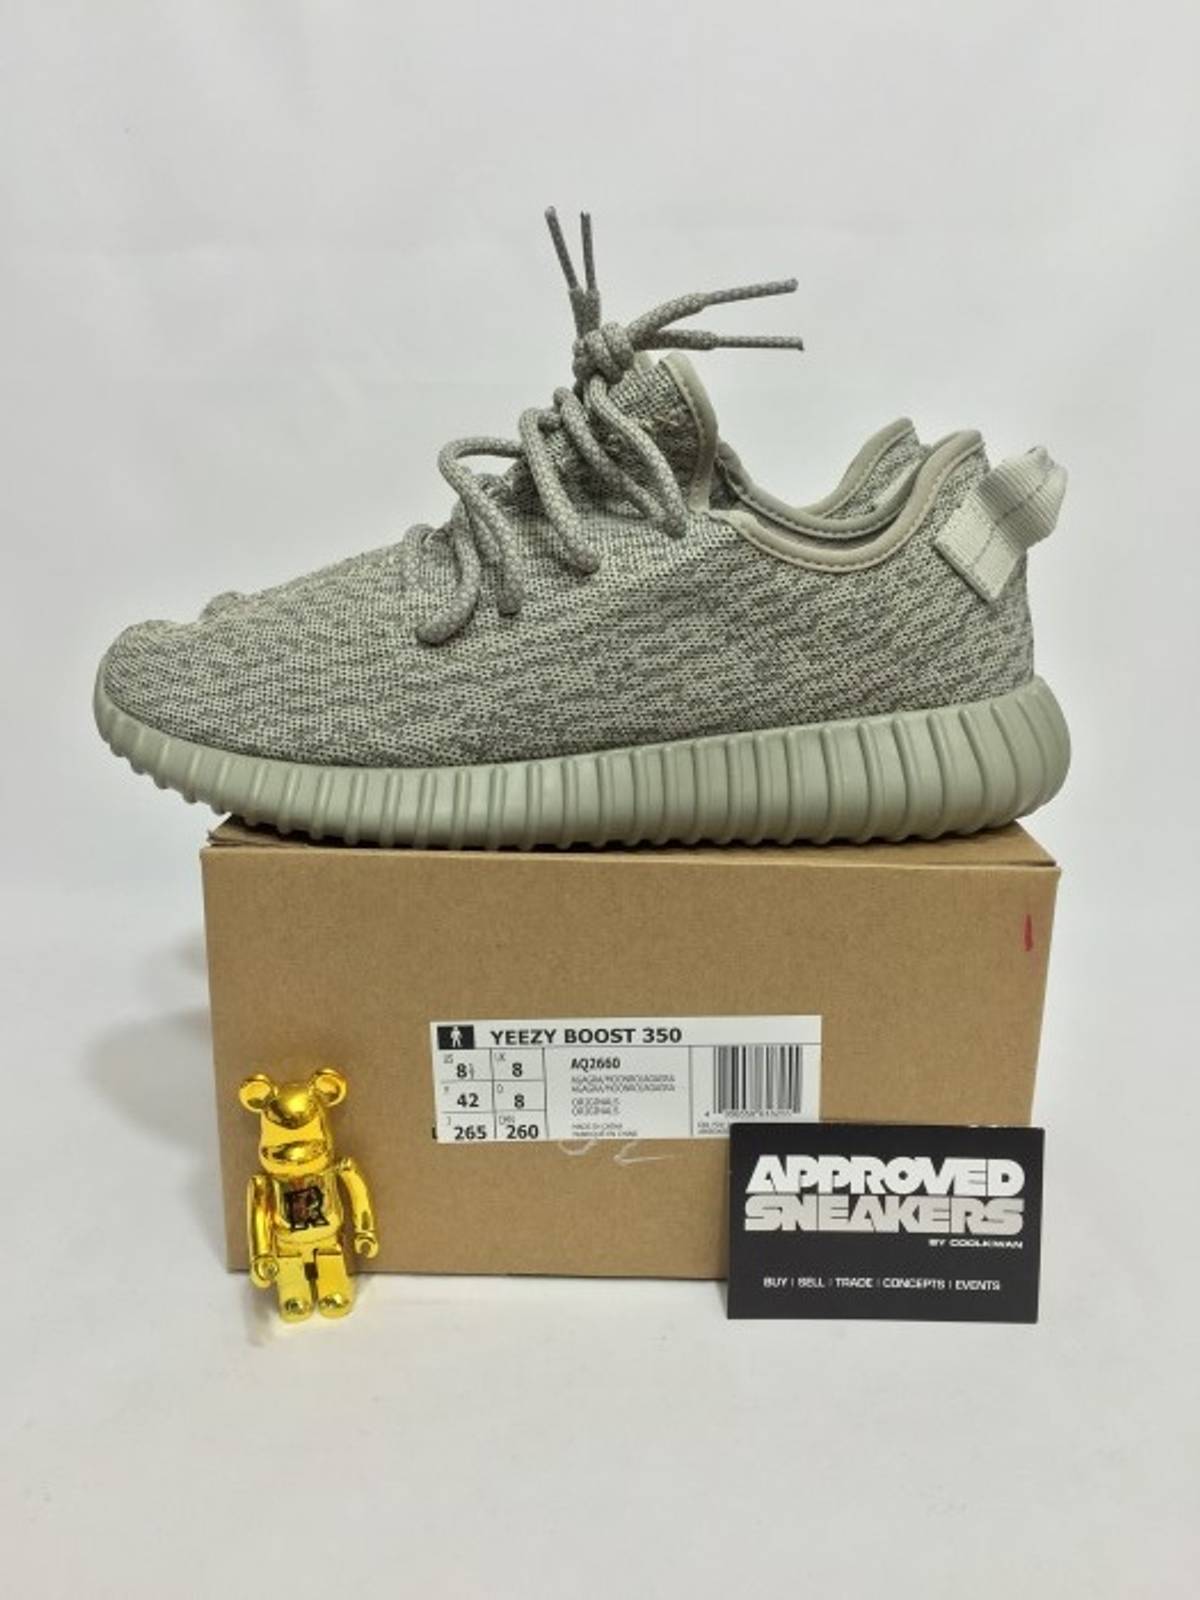 Cheap Adidas Yeezy Boost 350 V2 Gid Glow In The Dark Size 8 Menaposs Shoes Nice